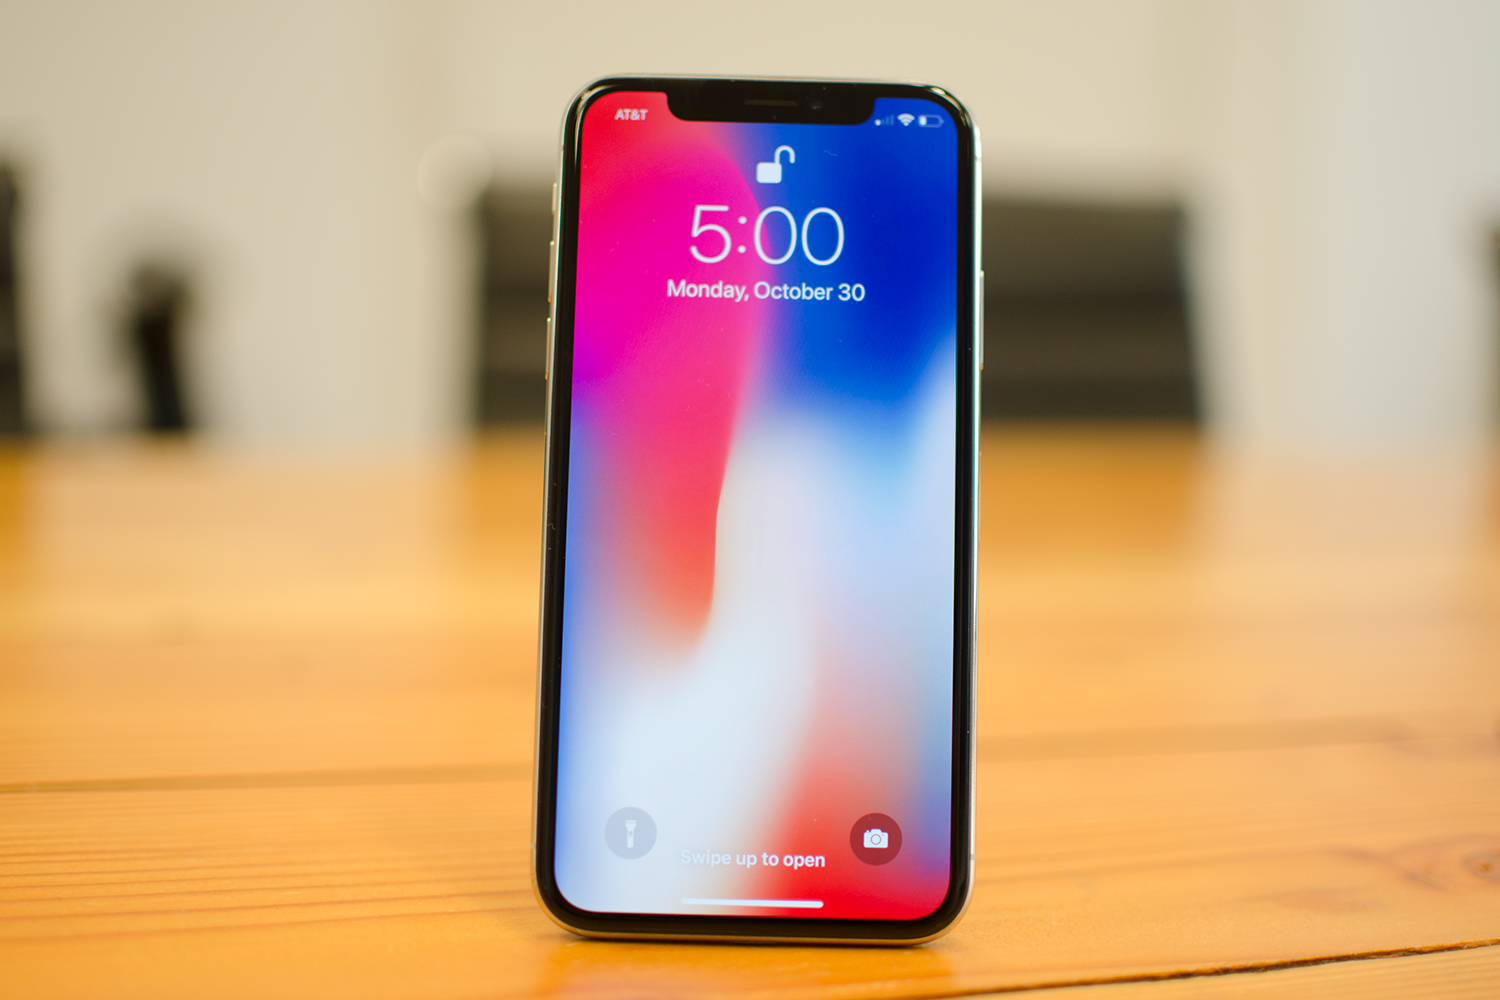 Apple iPhone X screen upright on a table.